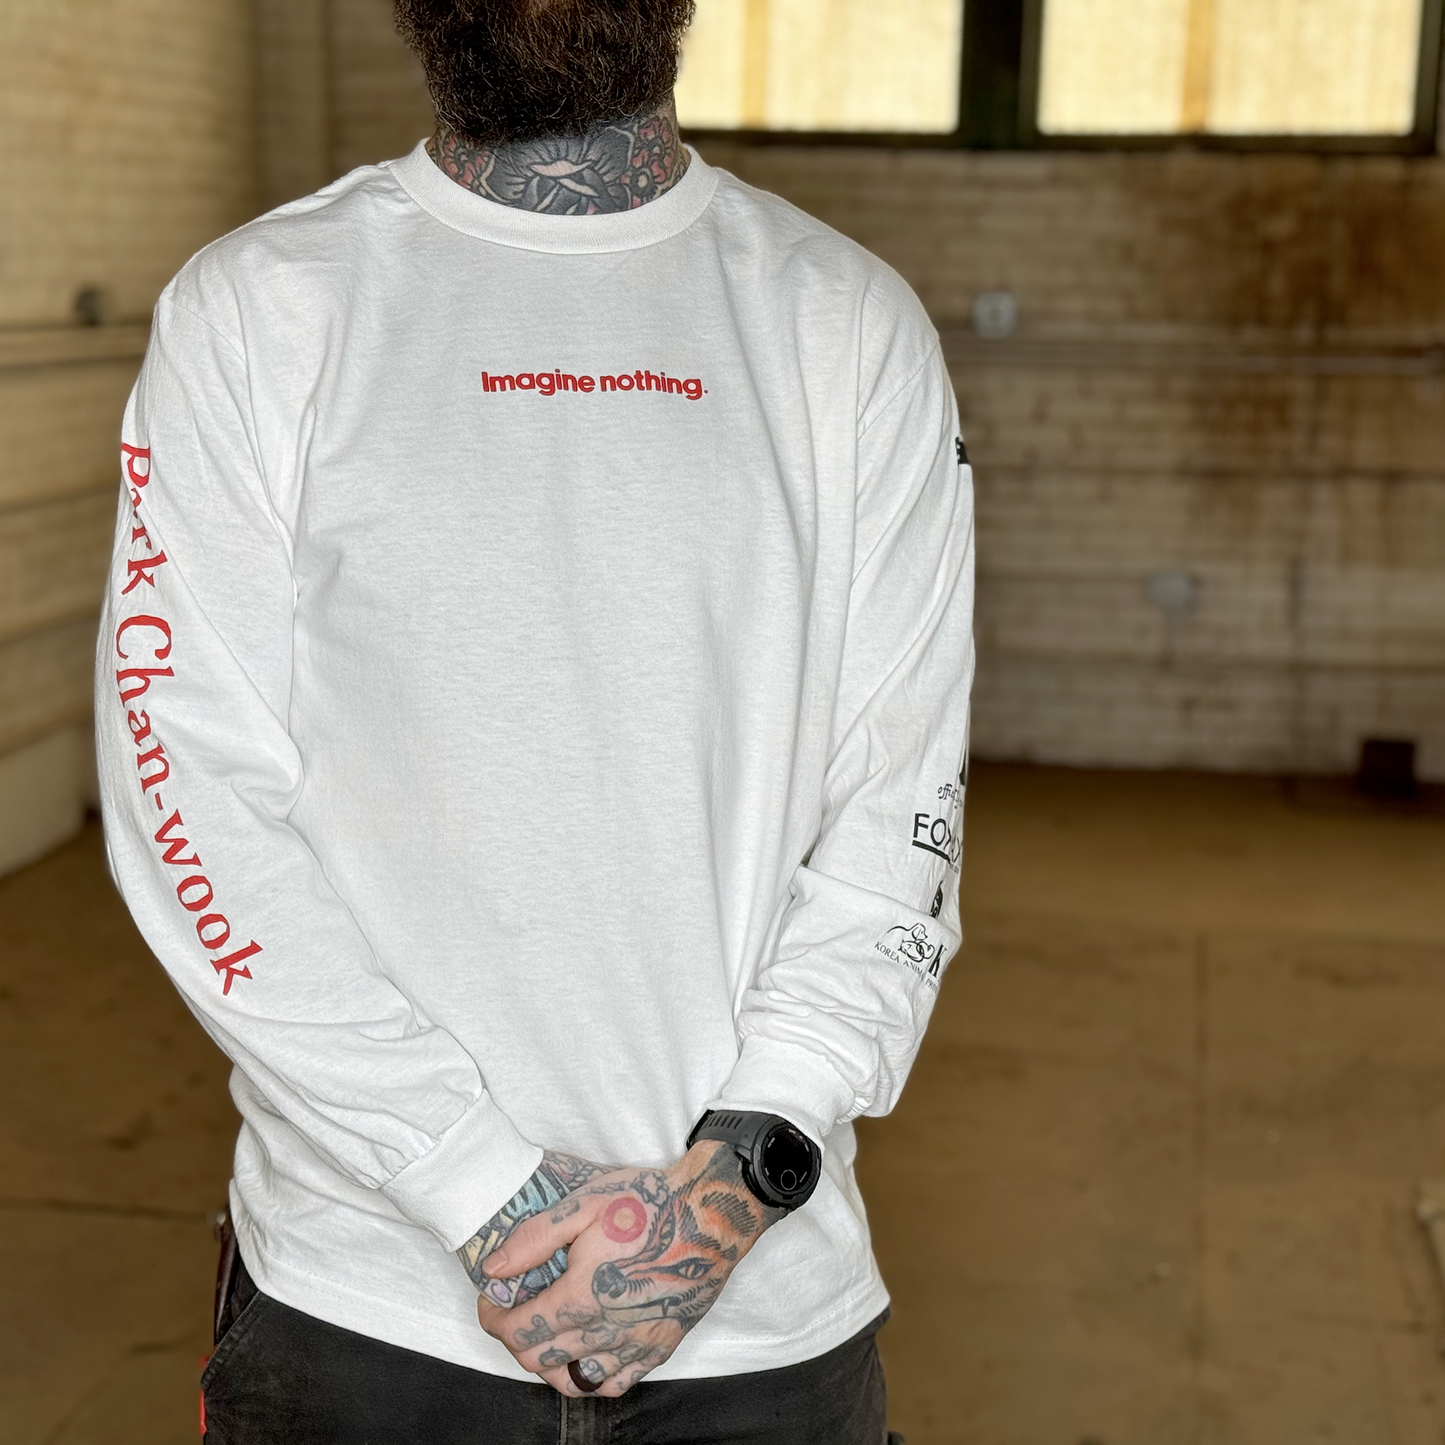 A model wearing of the shirts that reads "Imagine nothing." on the front. The sleeve print is slightly visible because of the models crossed hands.